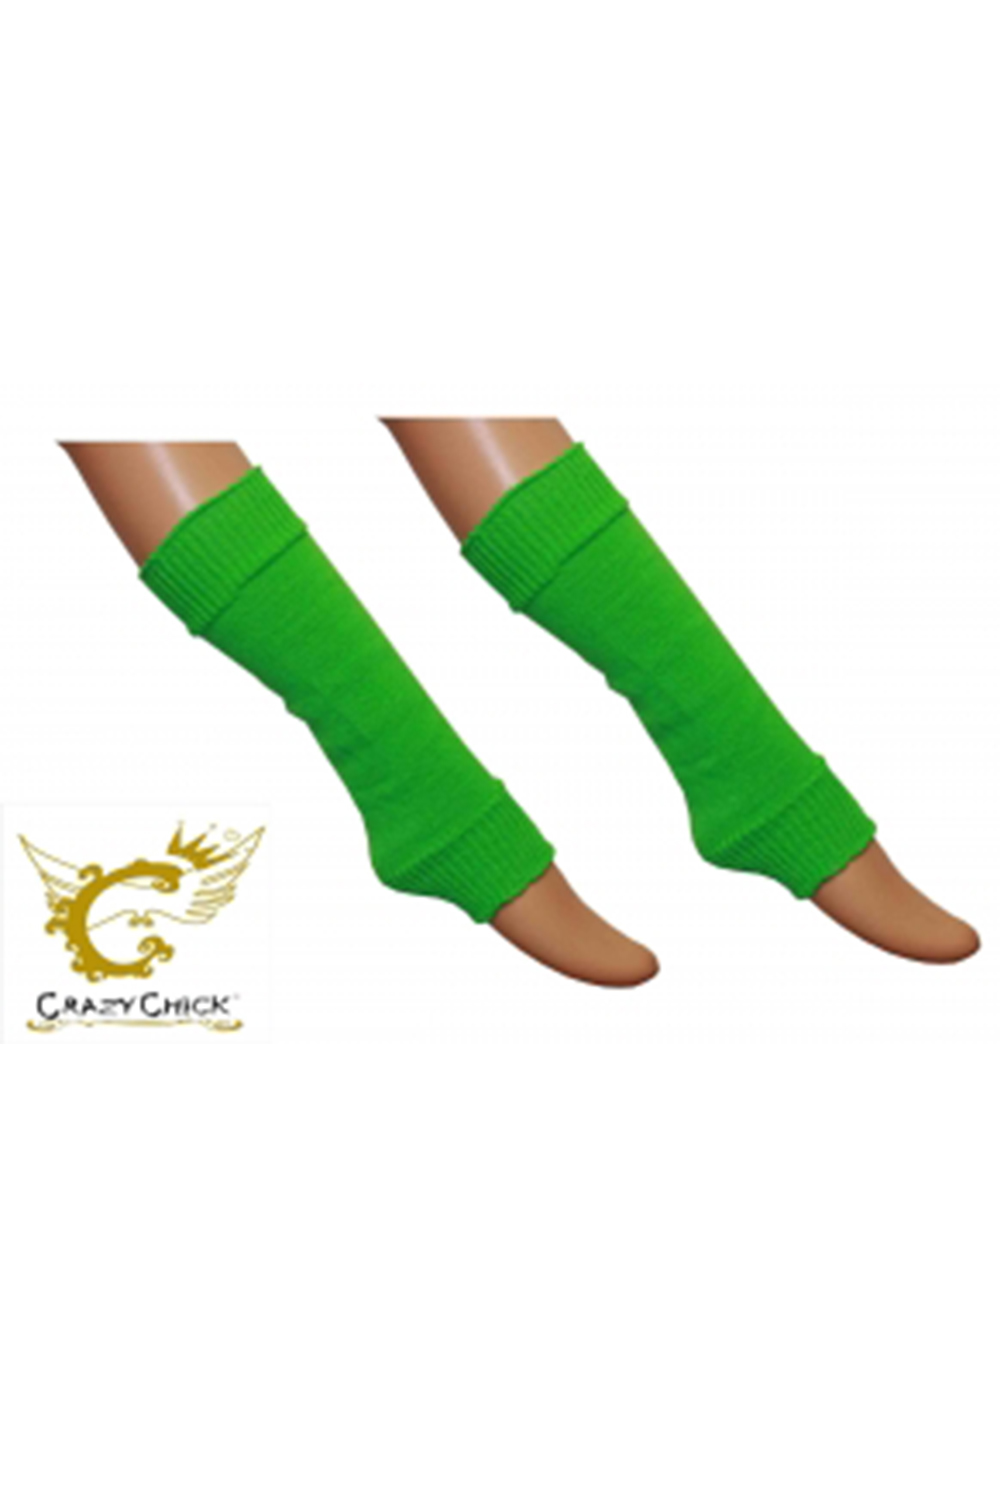 Crazy Chick Girls Green Legwarmers (Pack of 12)